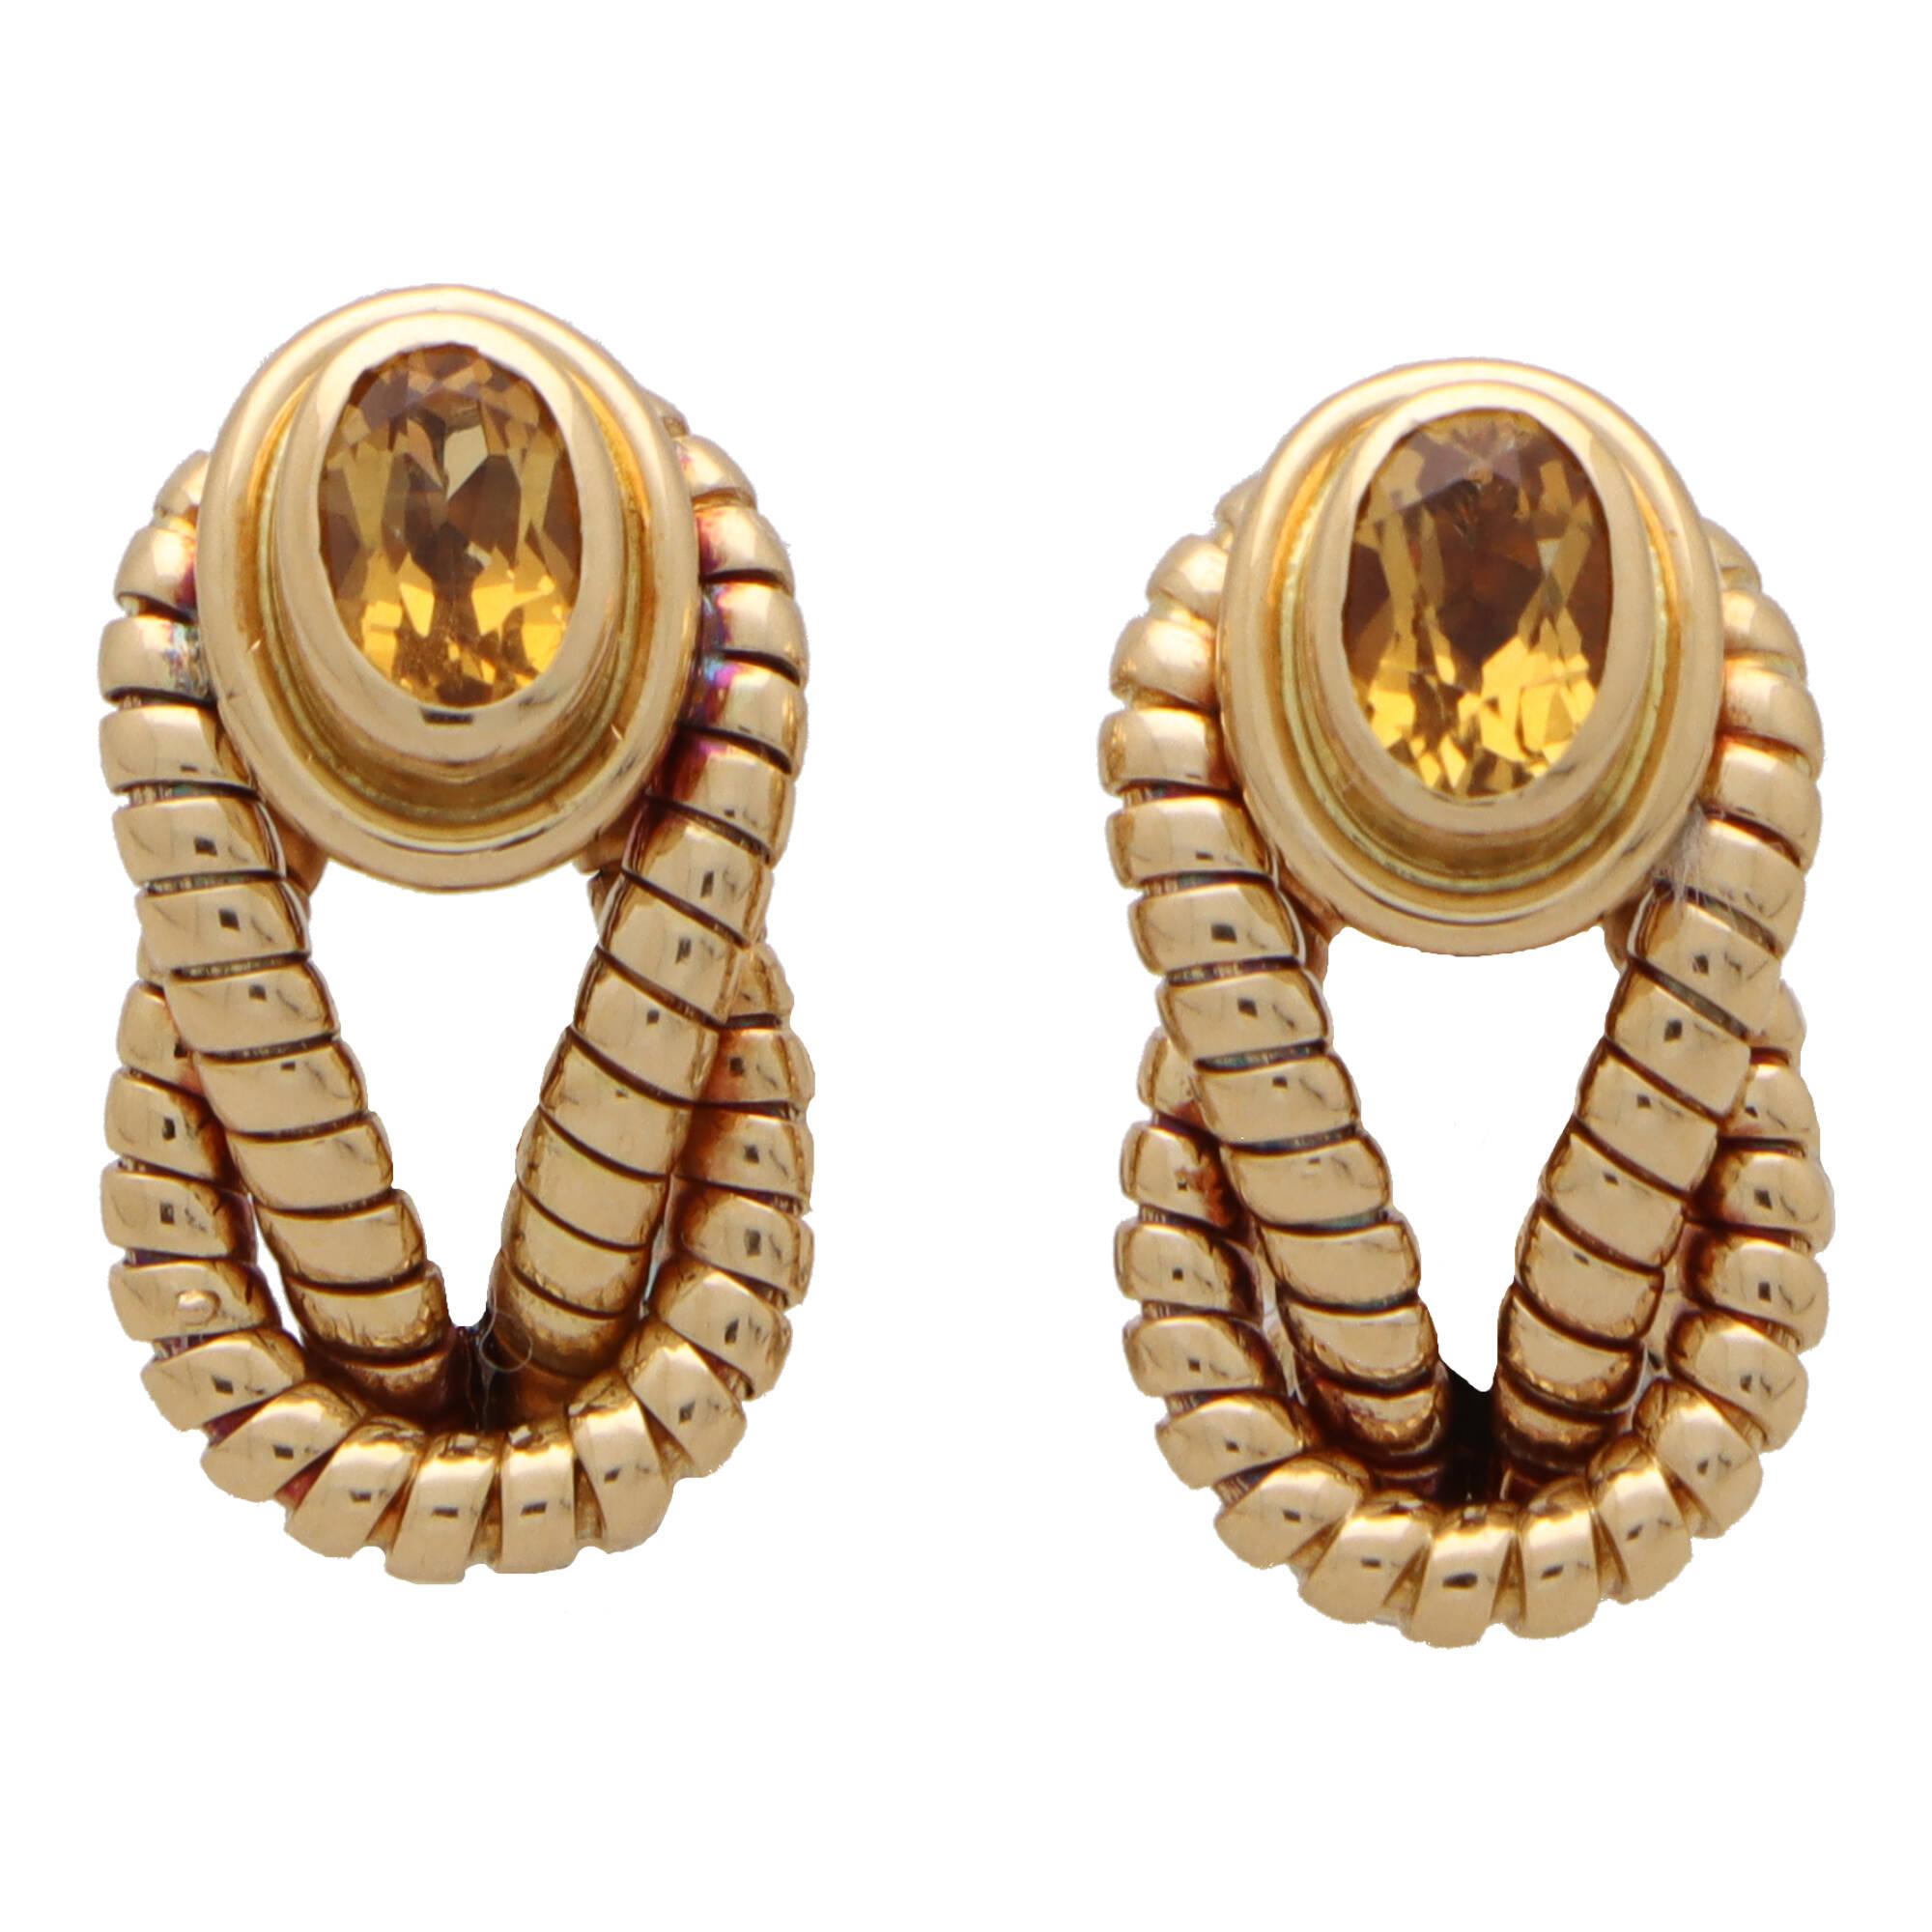 Retro Vintage 1980s Cartier 'Hercules Knot' Citrine Earrings in 18k Gold and Steel For Sale